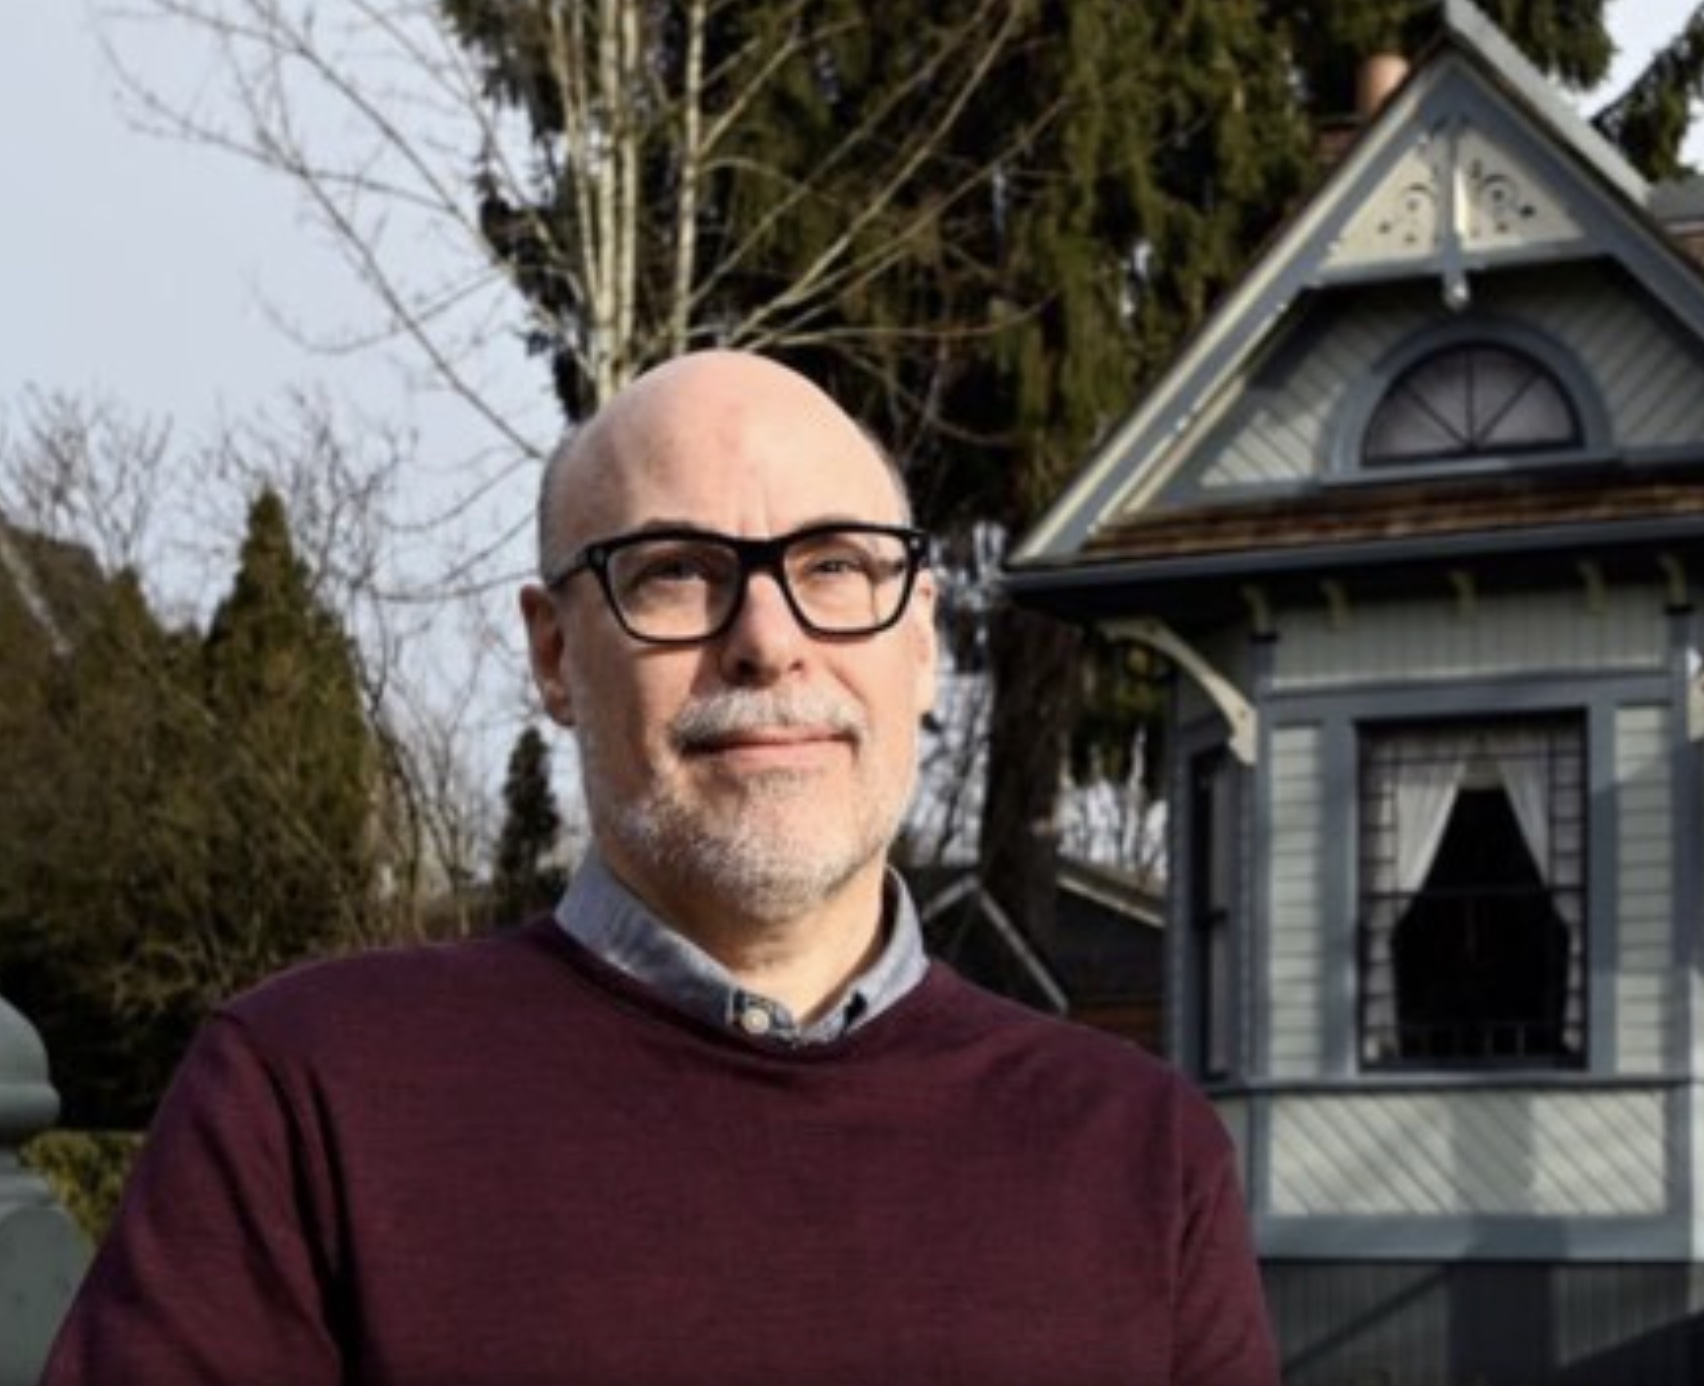 middle aged bald man with mustache and beard wearing black acetate glasses and a maroon sweater with collared shirt. Posing in front of an historic house and trees.